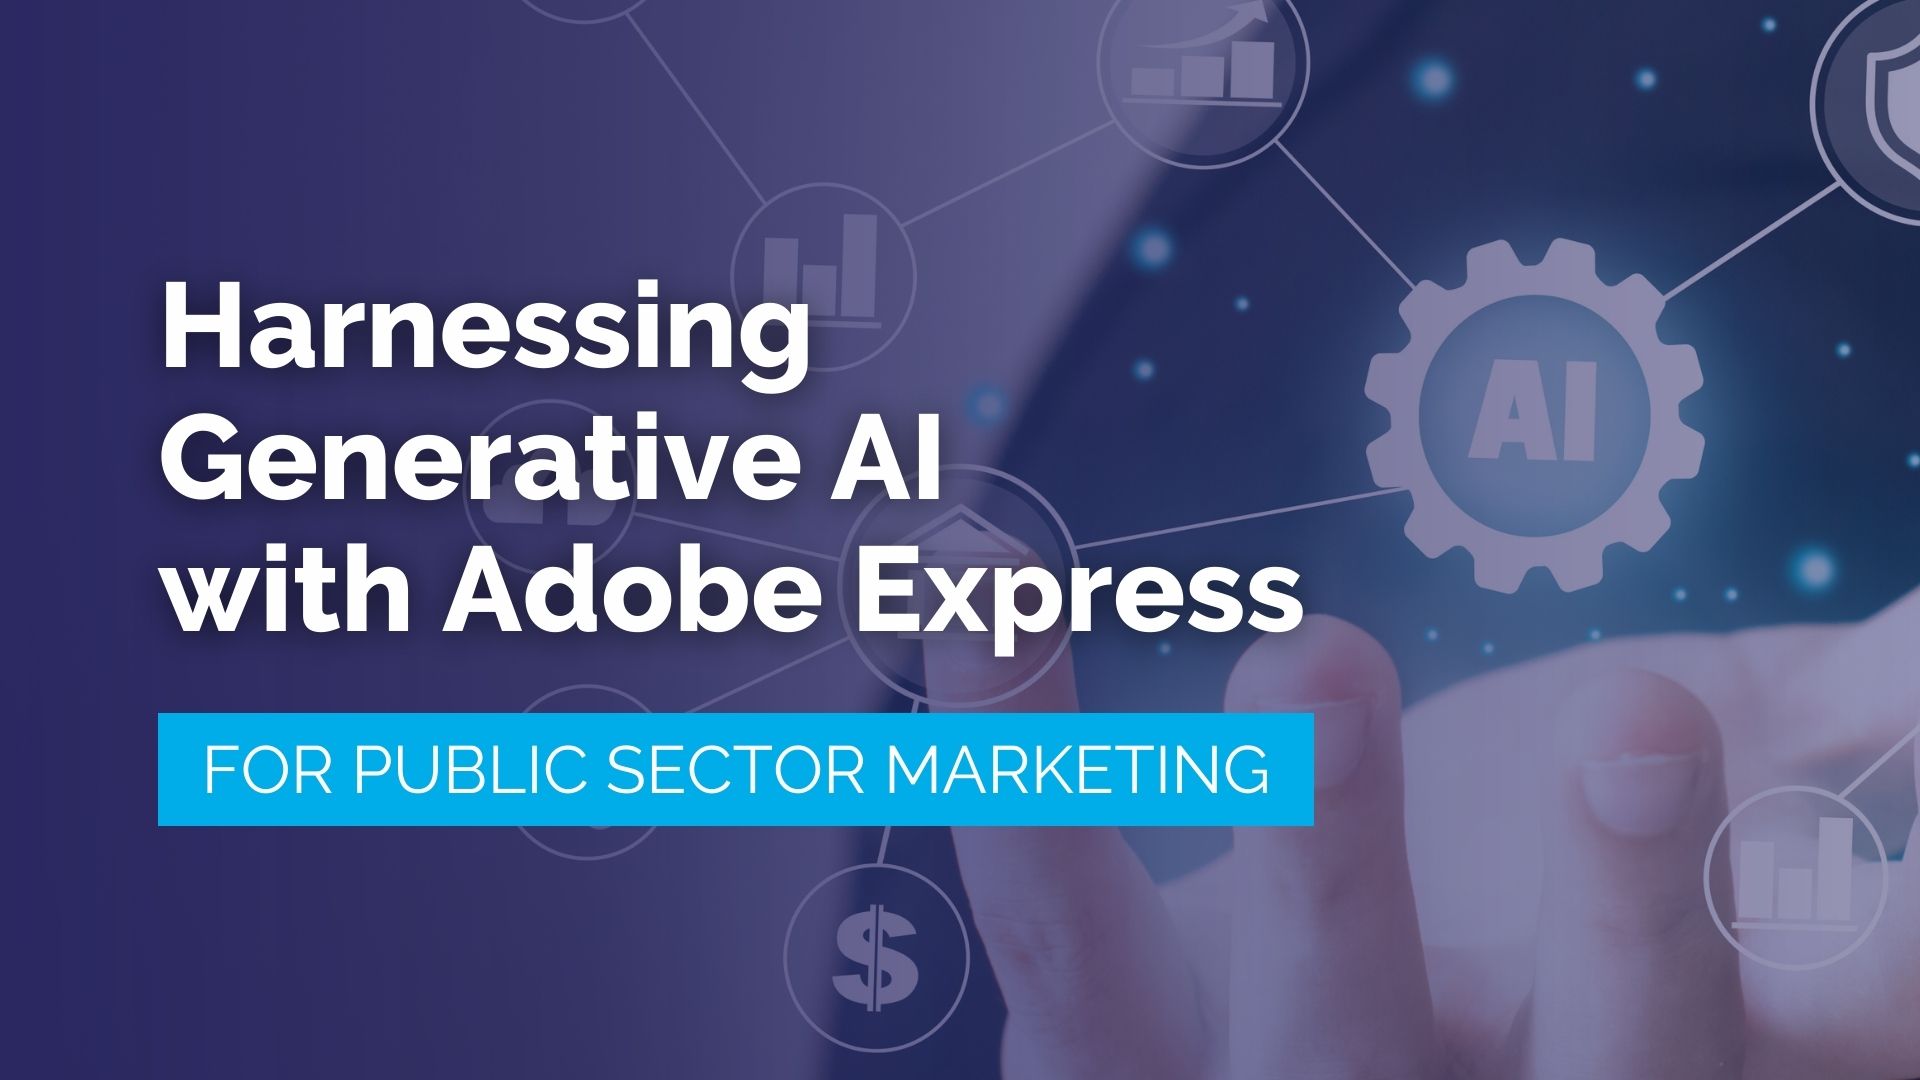 Harnessing Generative AI with Adobe Express for Public Sector Marketing